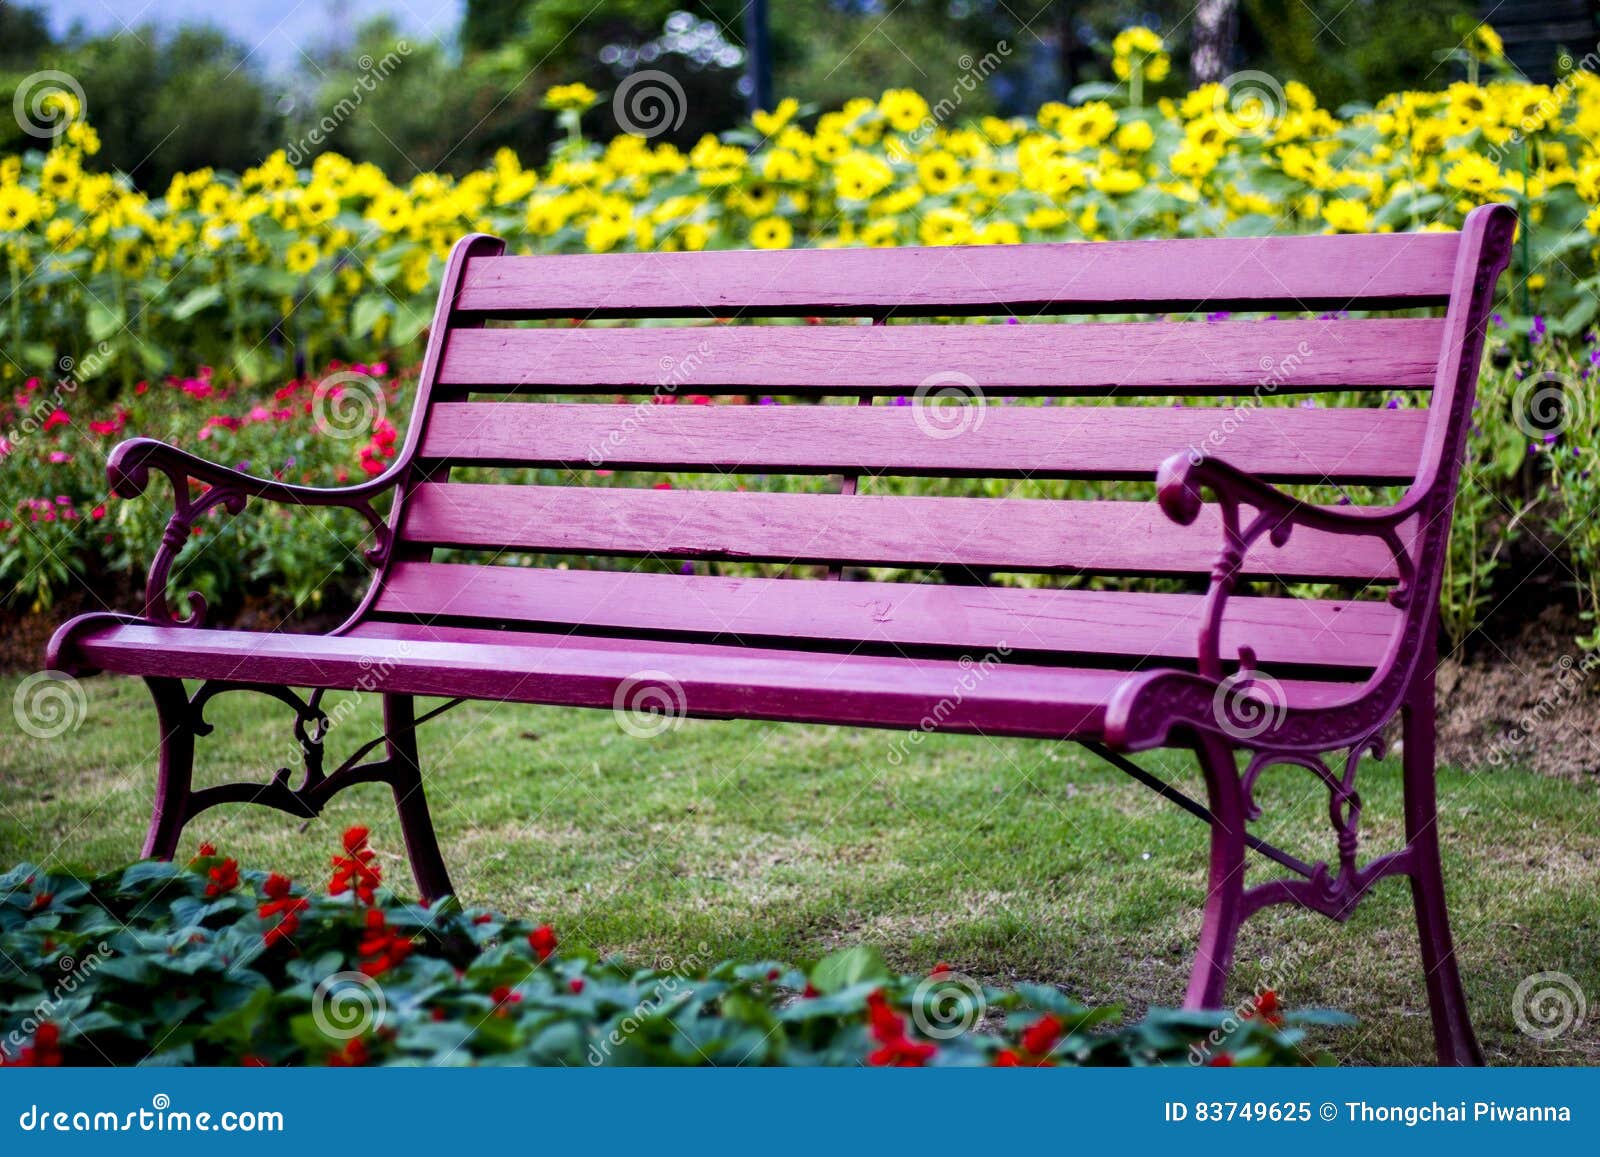 Chairs in flower garden stock image. Image of natural - 83749625